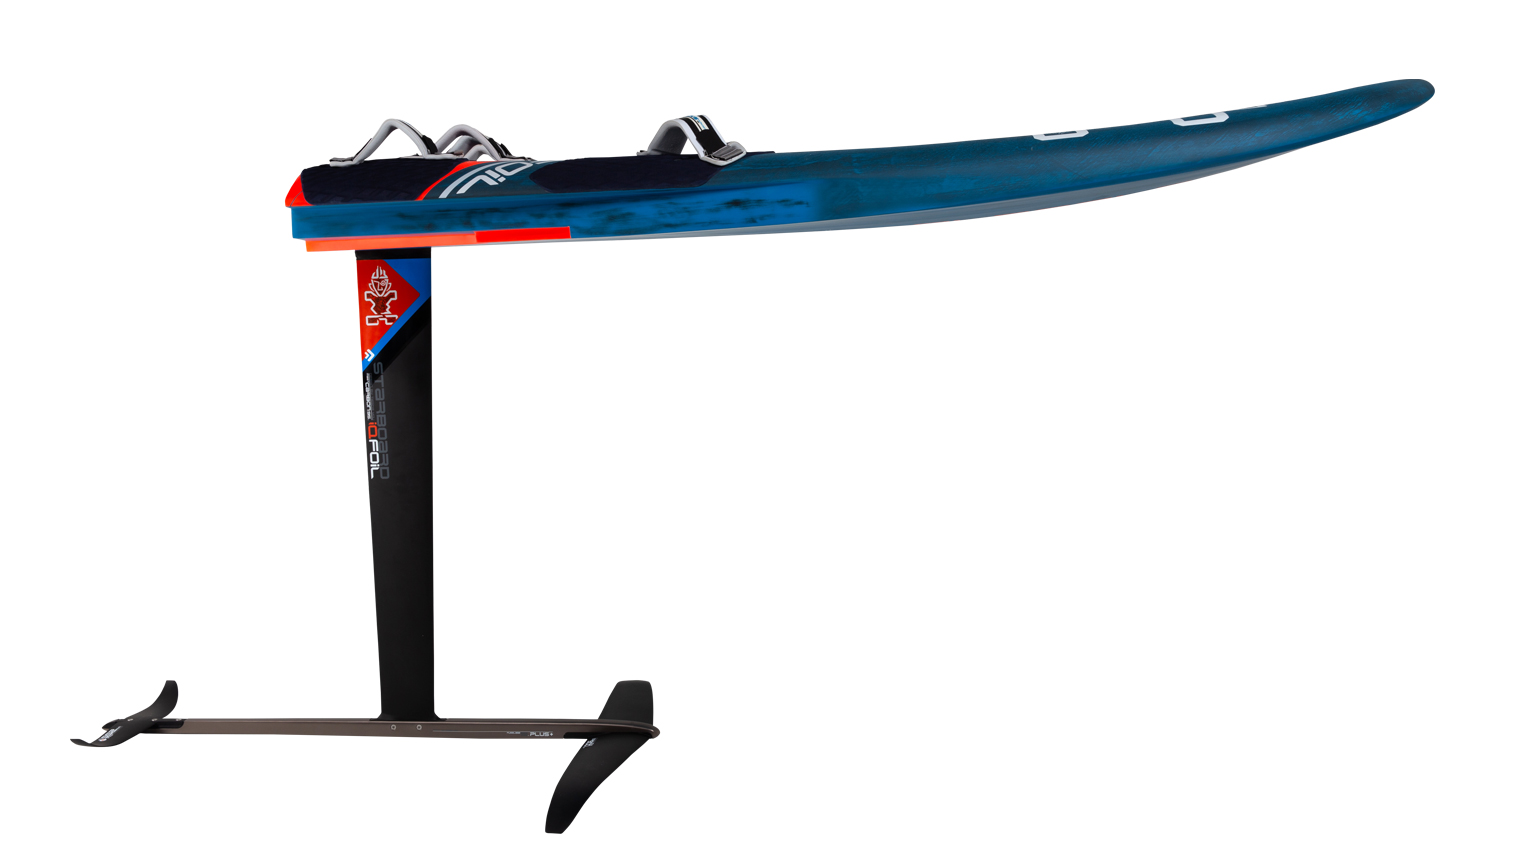 iQFOiL 95 » Starboard Windsurfing